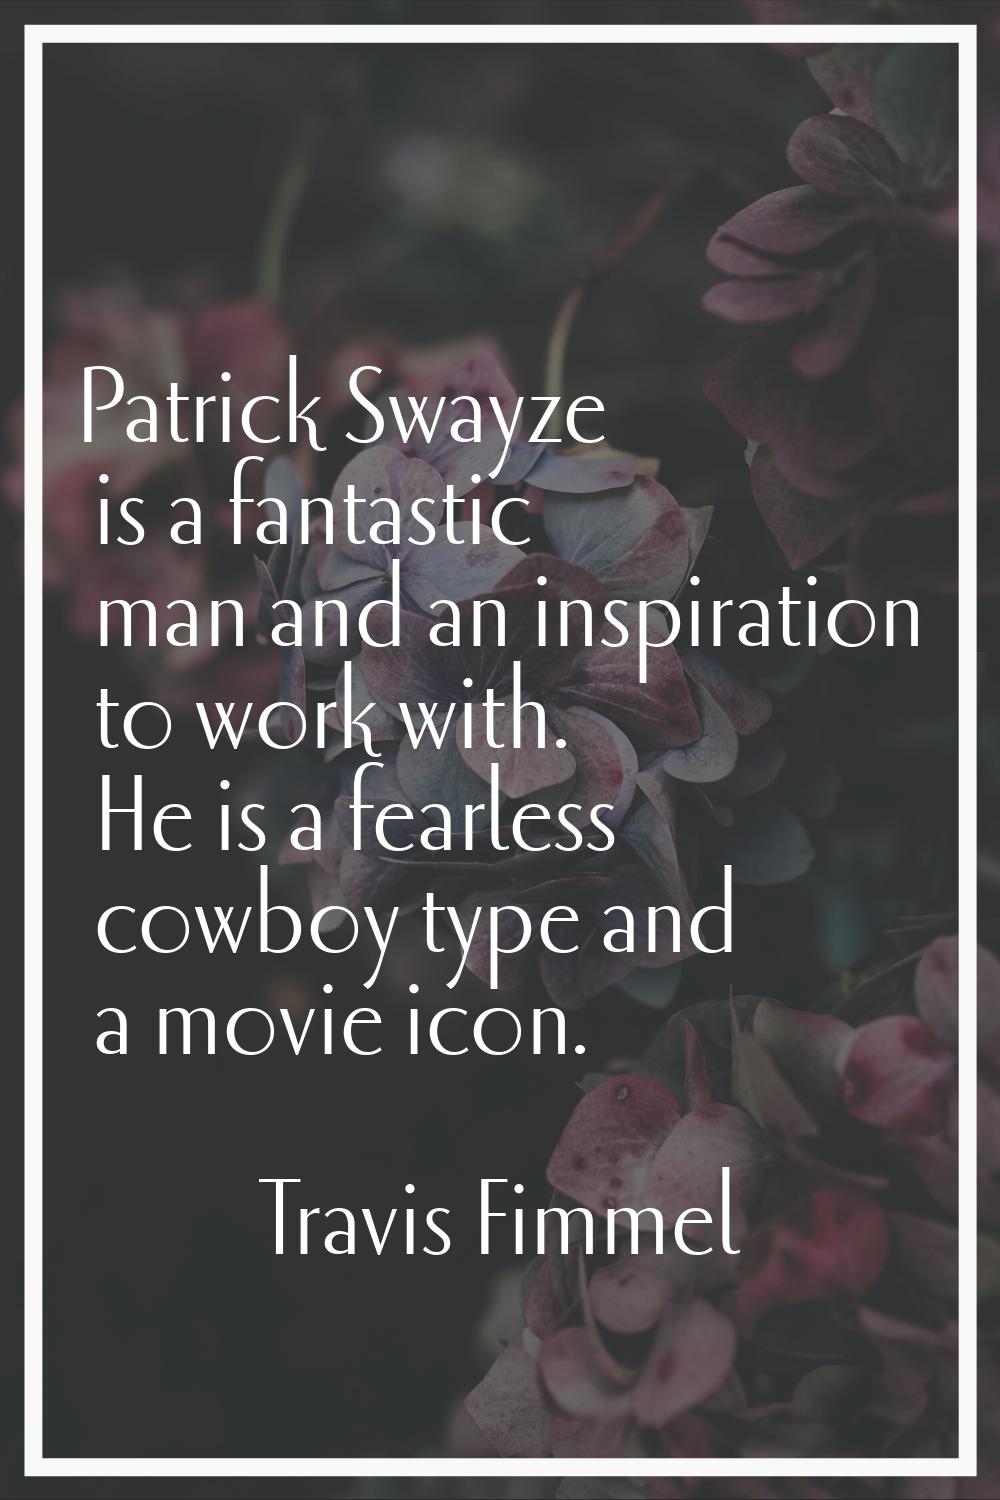 Patrick Swayze is a fantastic man and an inspiration to work with. He is a fearless cowboy type and